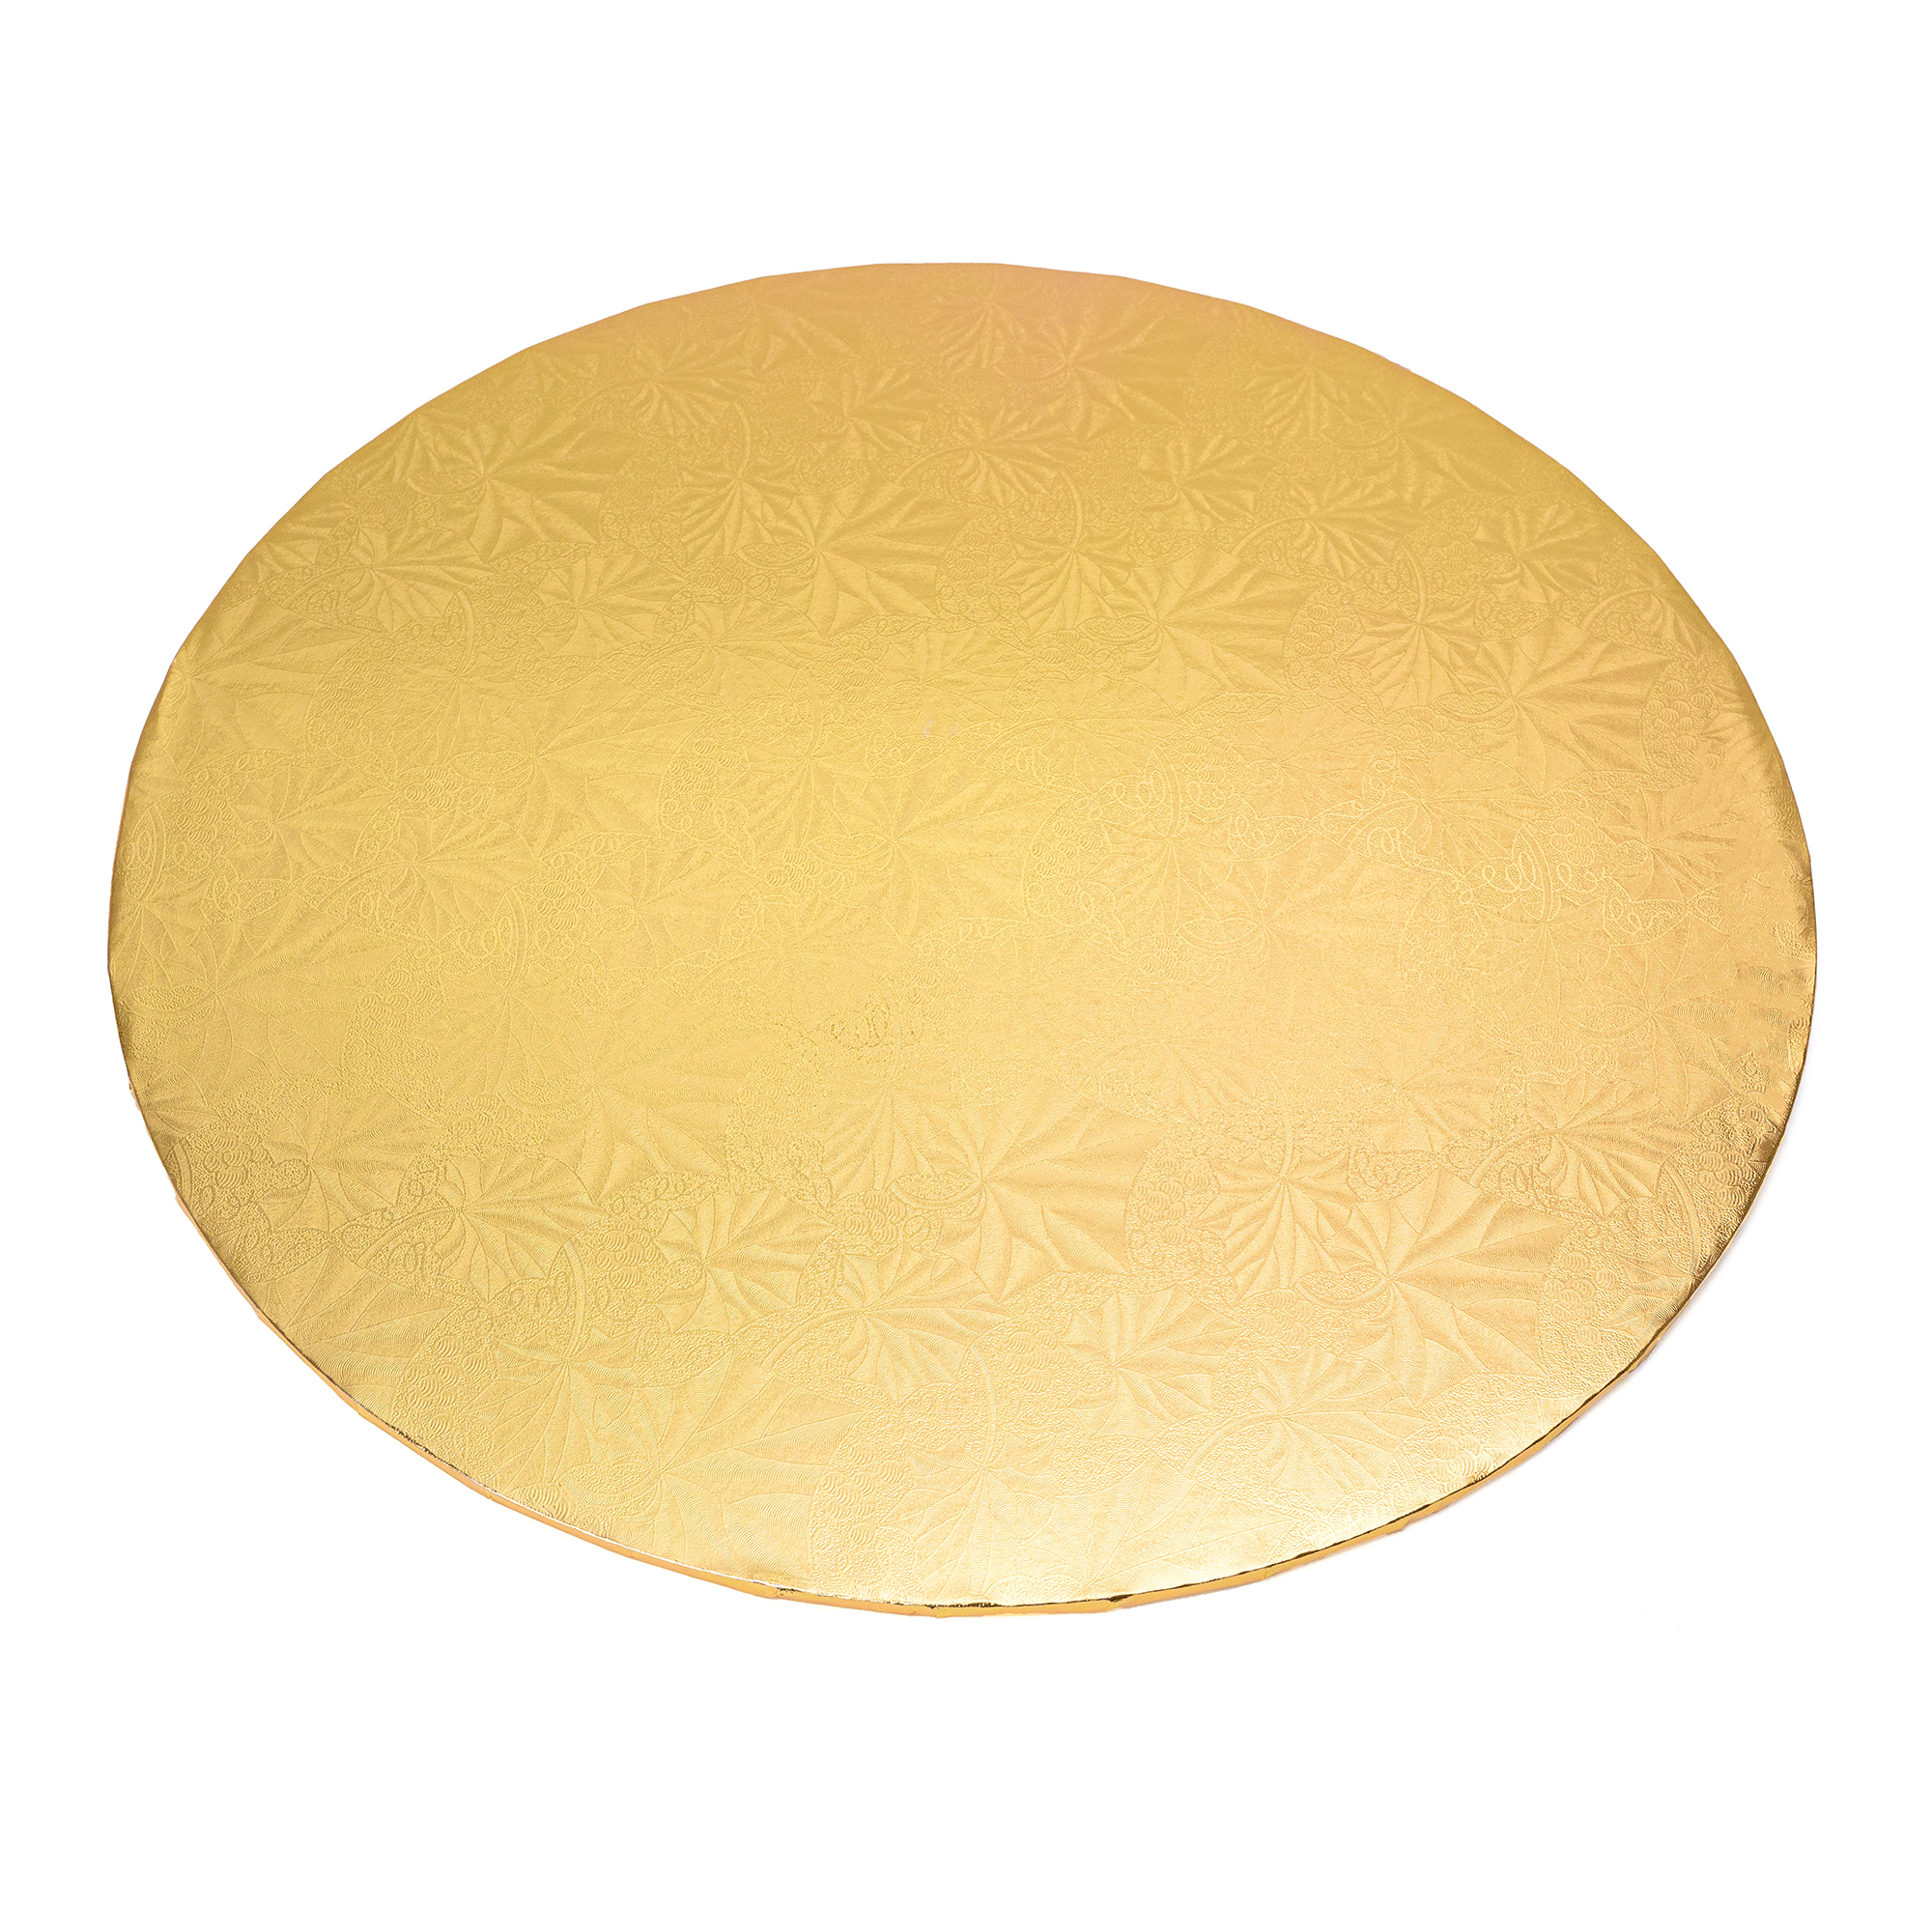 Foil Covered Cake Board 16" 5pc/pack - Gold